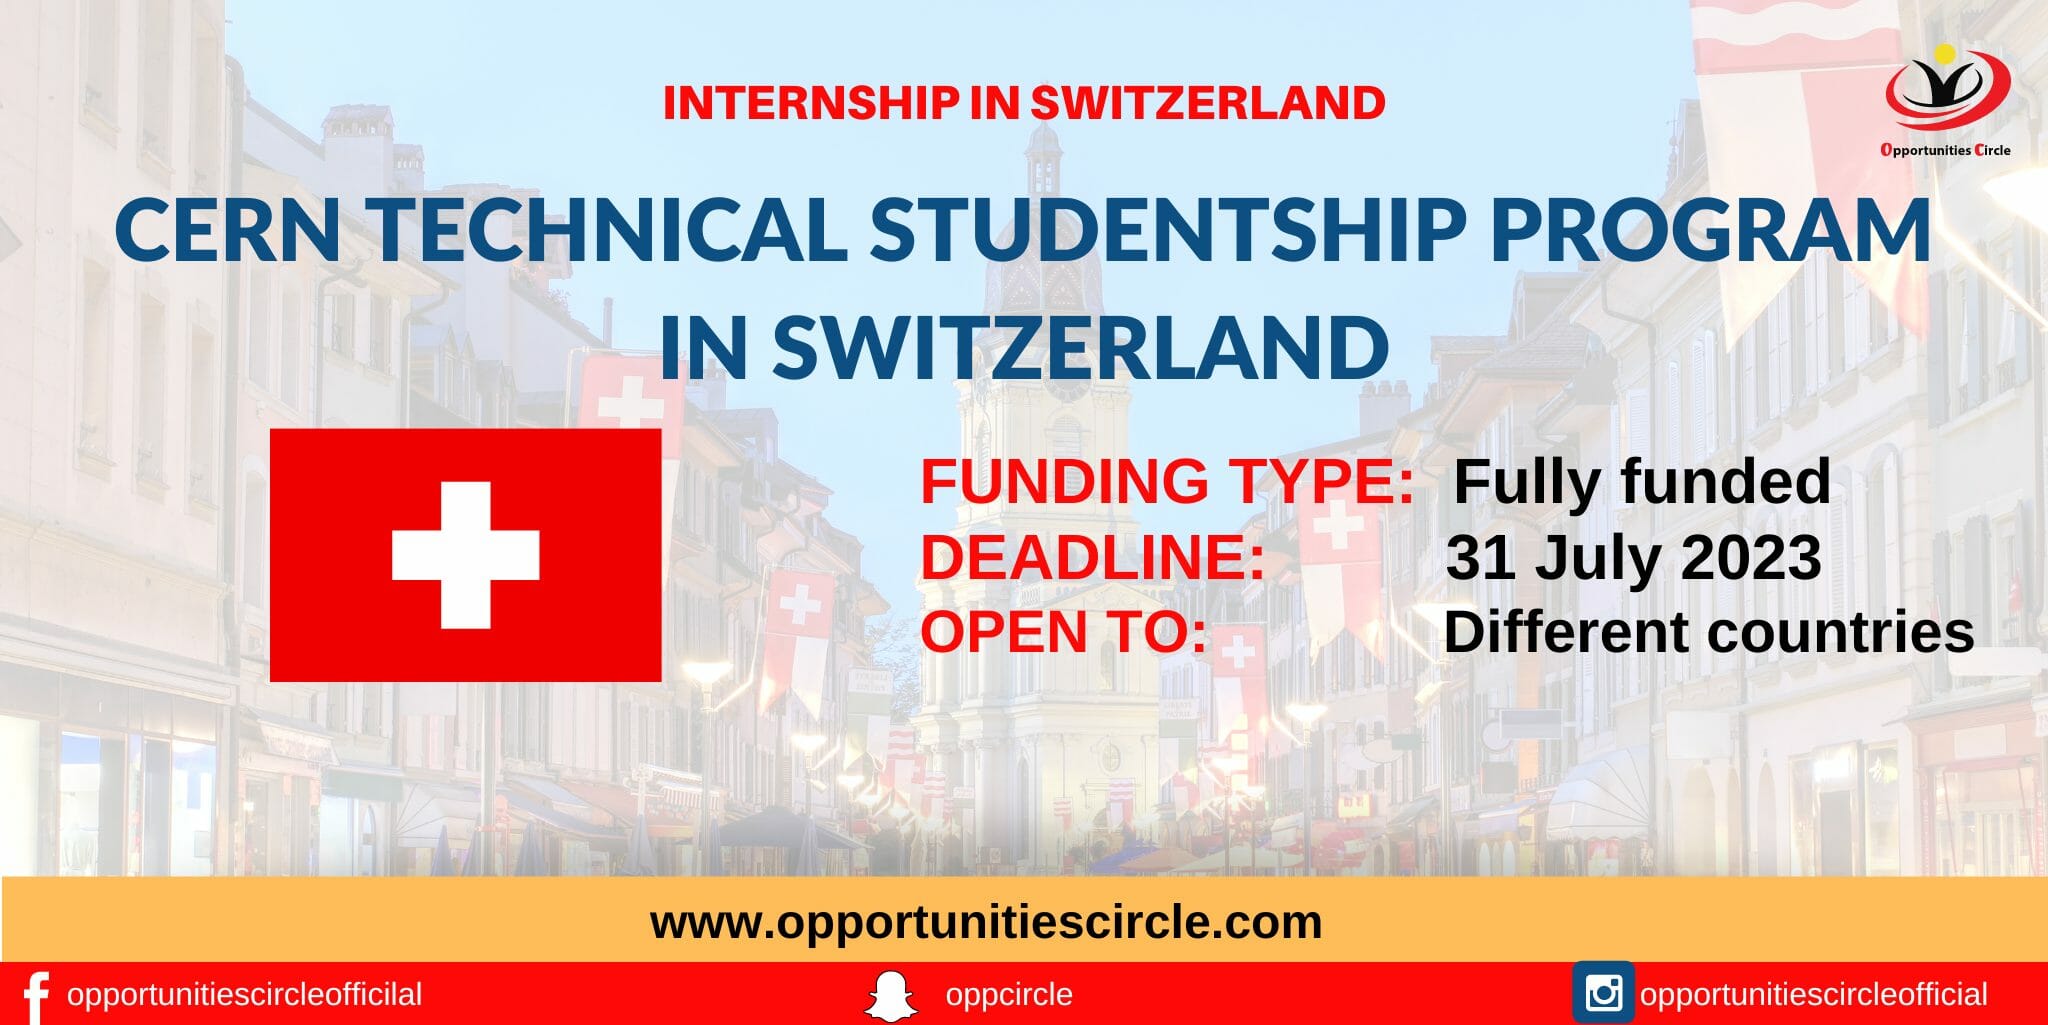 CERN Technical Studentship Program 2023 in Switzerland Fully Funded